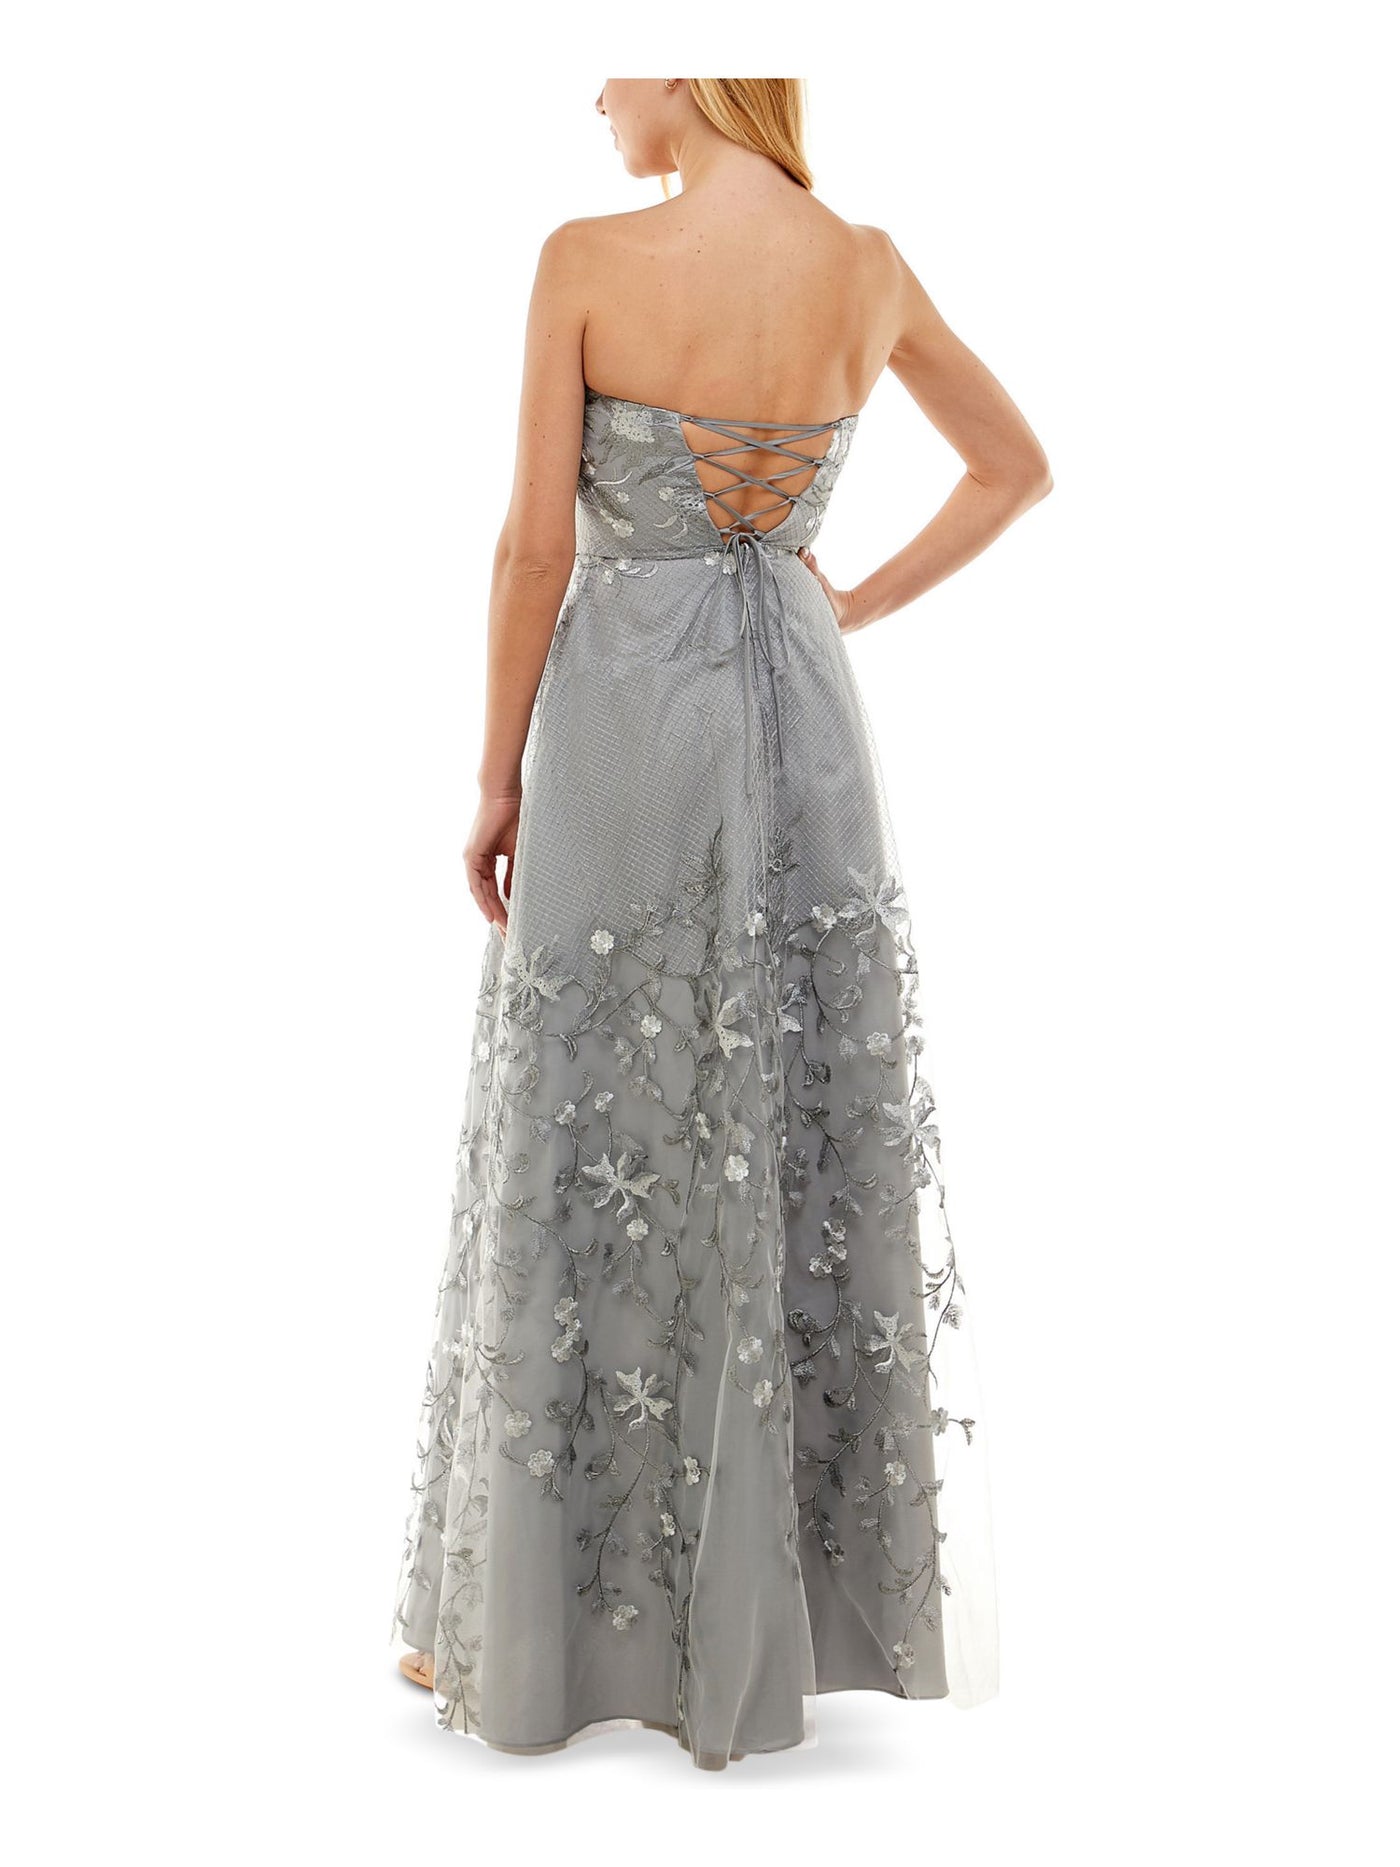 CITY STUDIO Womens Embroidered Lace Zippered Sleeveless Strapless Full-Length Formal Gown Dress